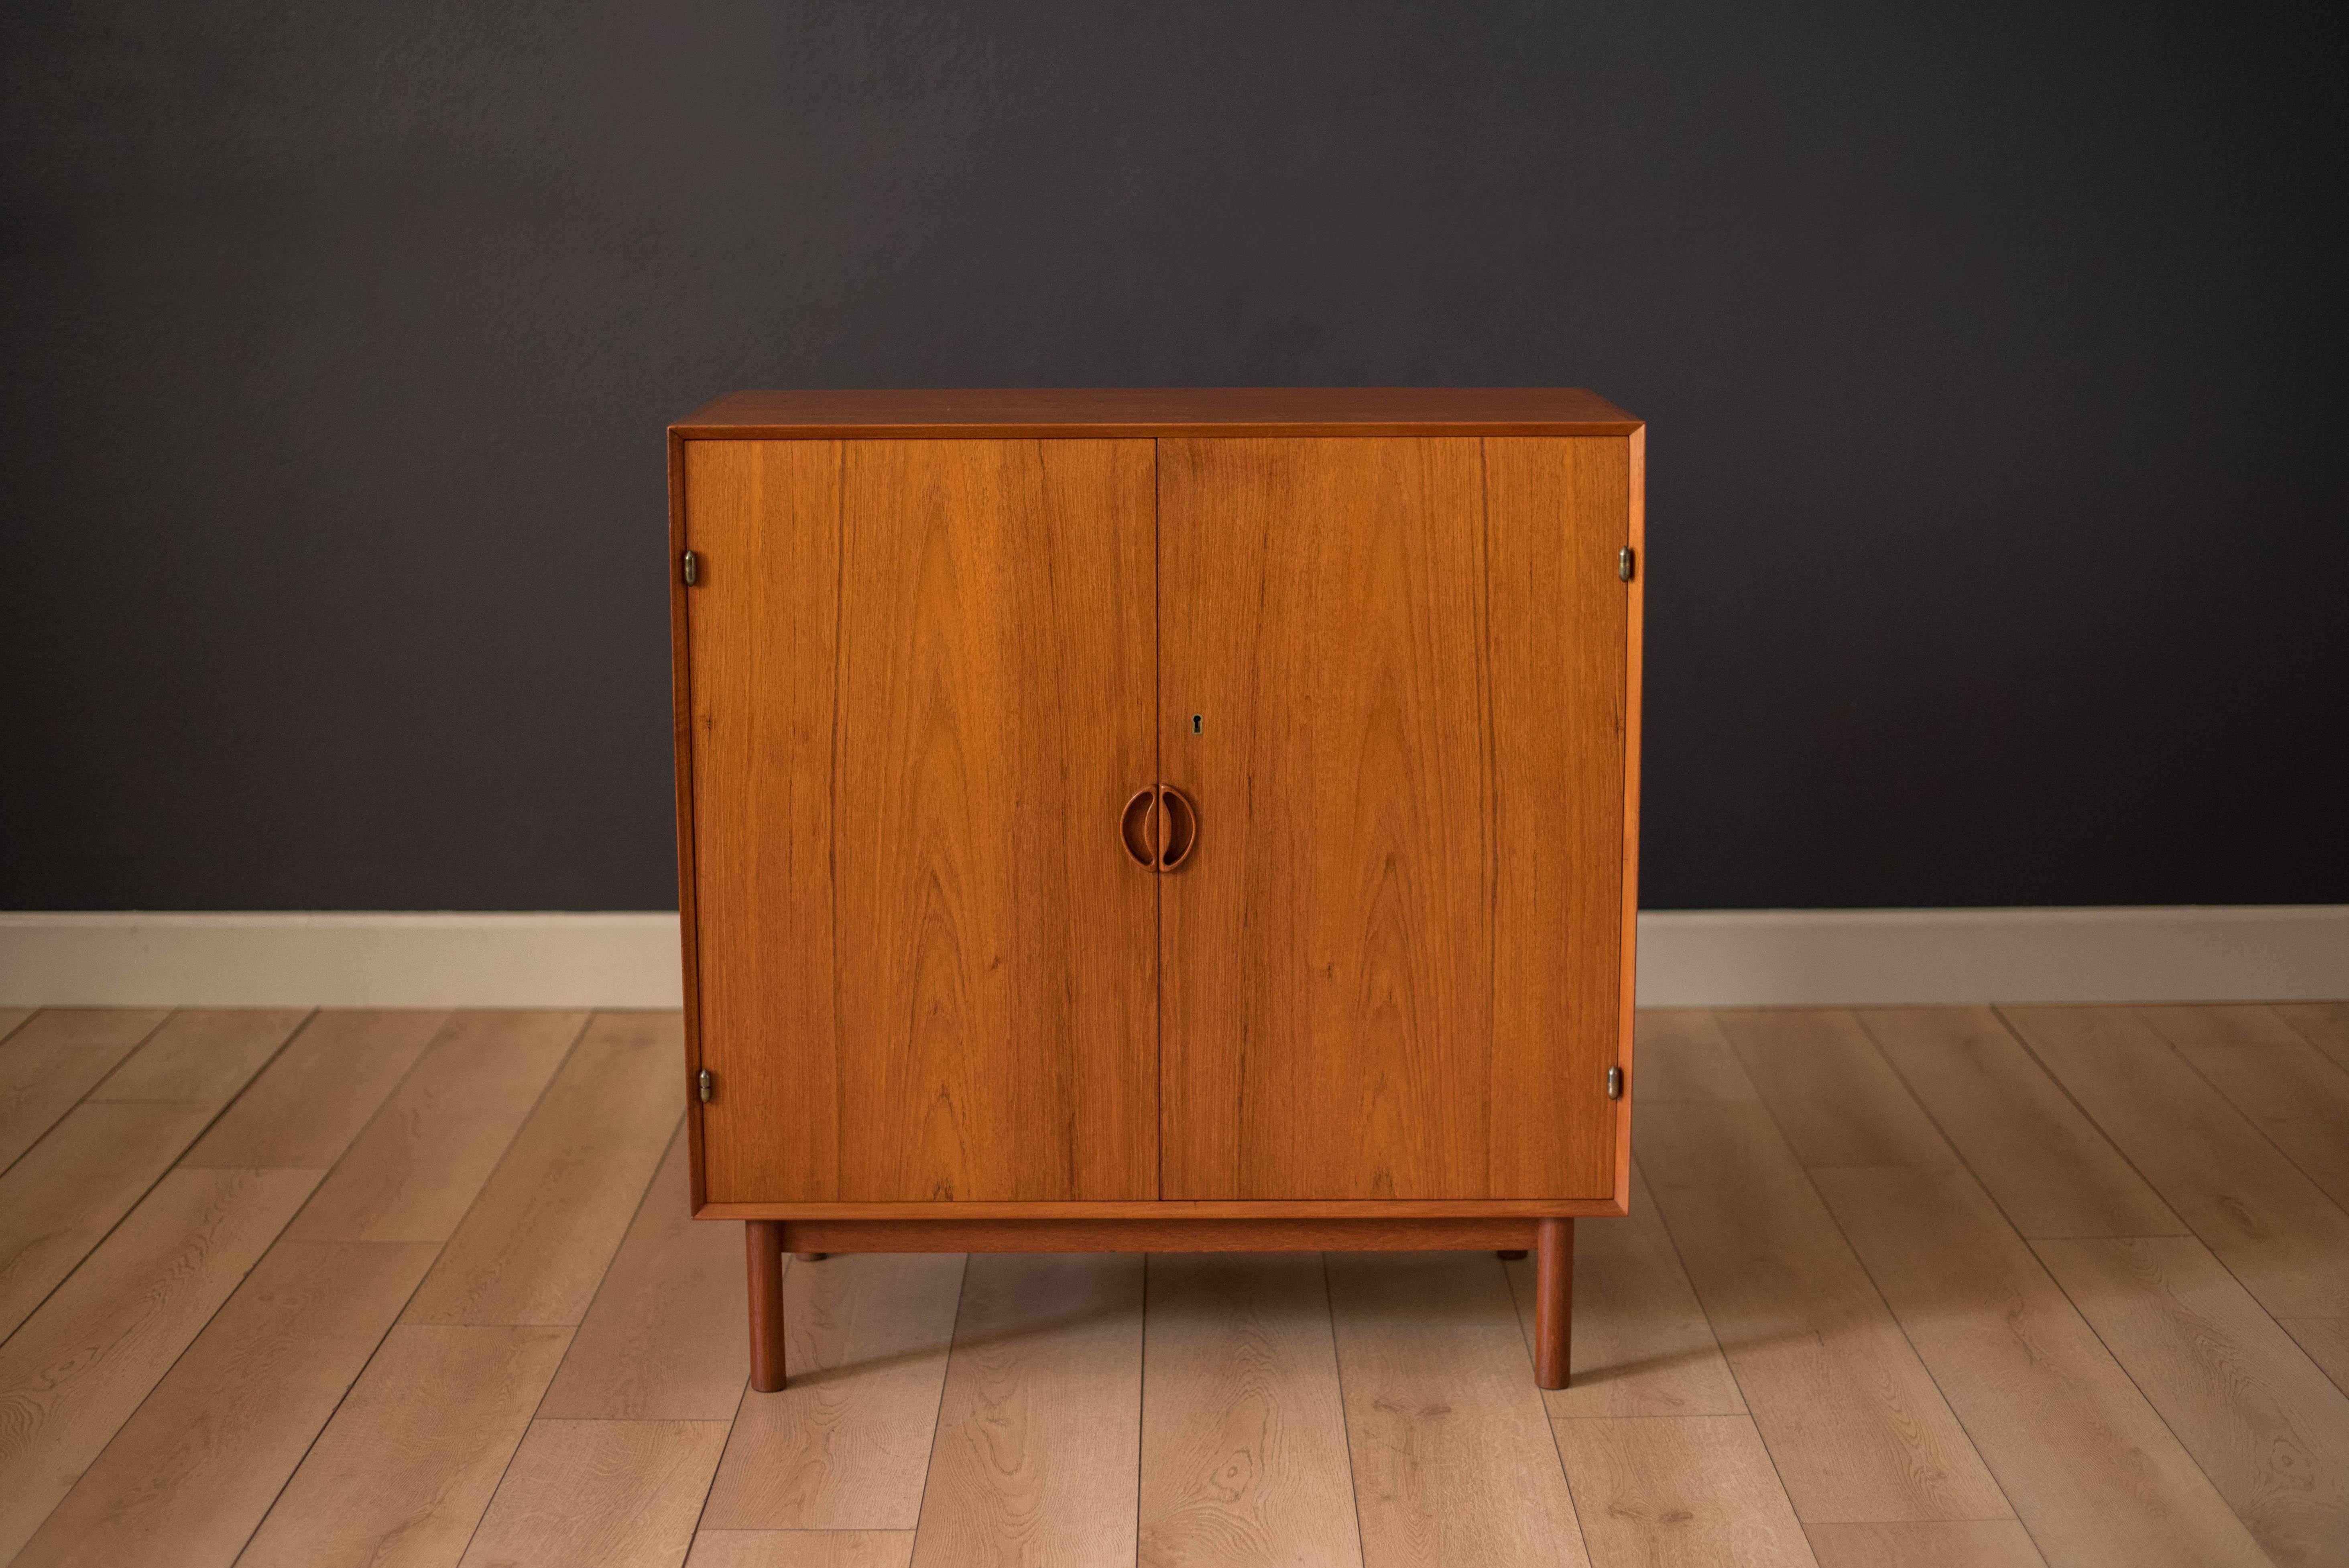 Mid-Century teak cabinet by Peter Hvidt and Orla Mølgaard-Nielsen for Søborg Møbler. This piece displays detailed finger joinery and sculpted wood handles. Interior of cabinet features three sliding drawers and one adjustable shelf. Skeleton key is